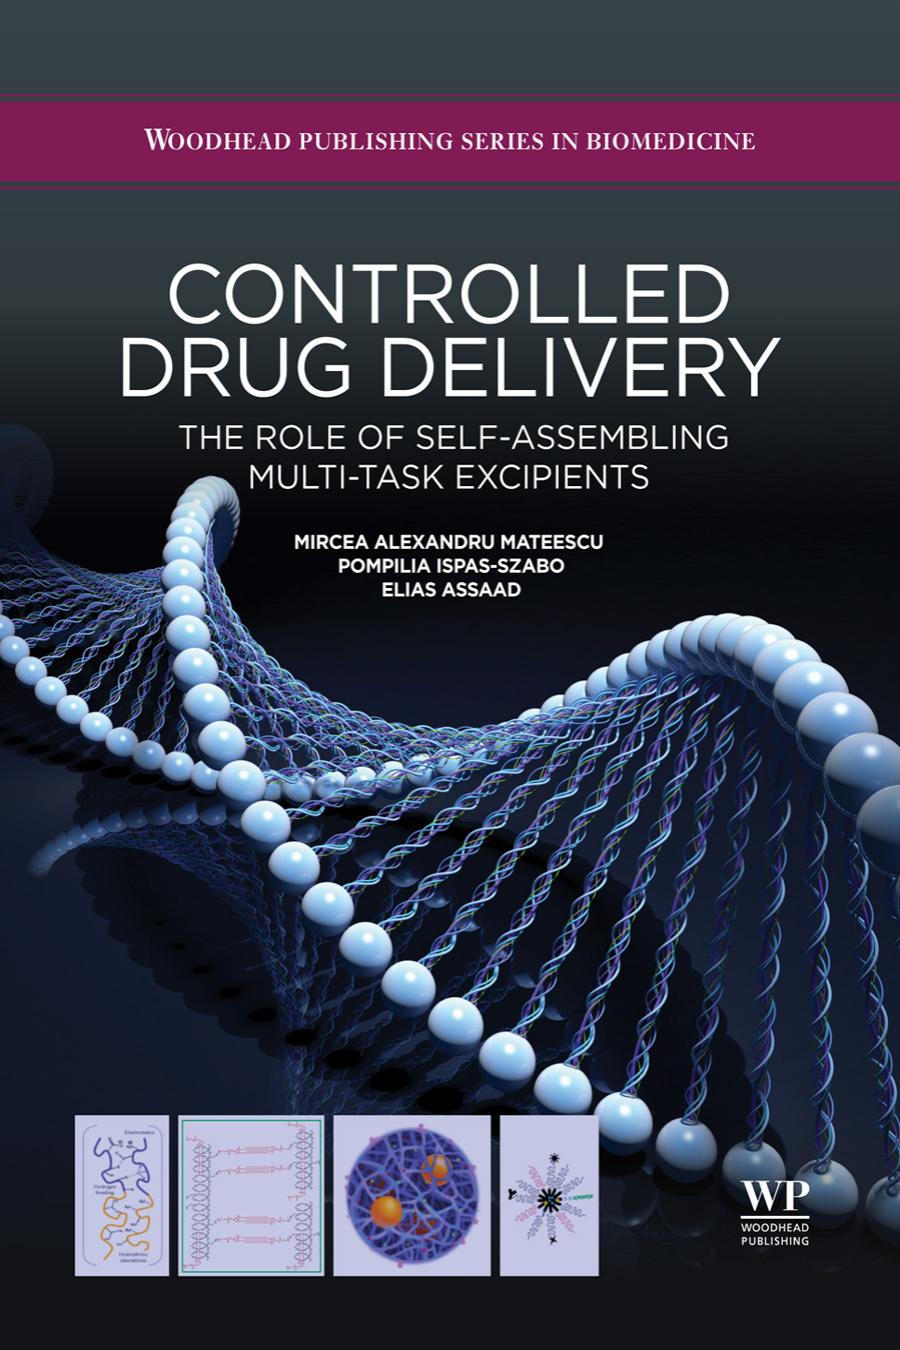 Controlled Drug Delivery_ The Role of Self-Assembling Multi-Task Excipients.jpg